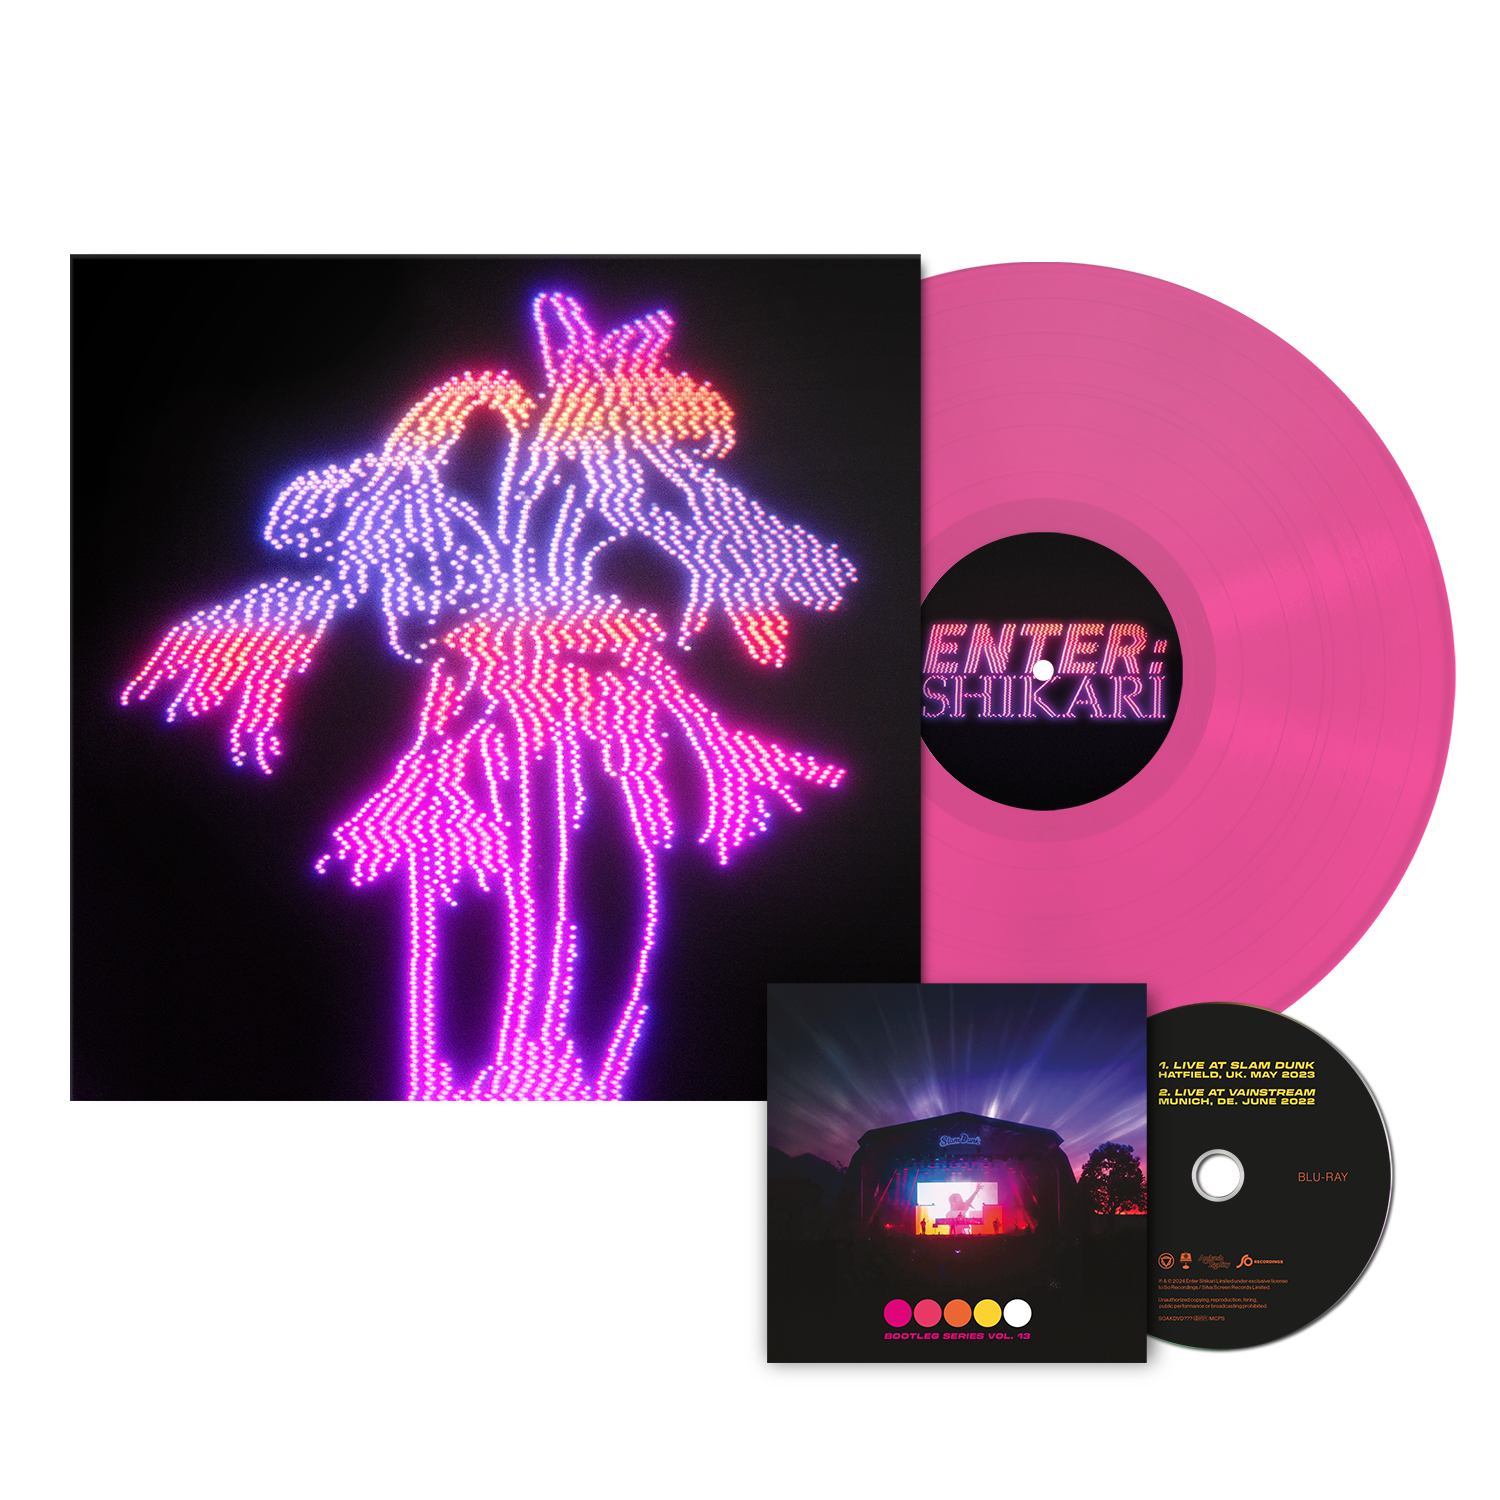 Dancing On The Frontline: Transparent Neon Pink Vinyl LP & Signed A Kiss For The Whole World Artwork Print [50 Available Only]